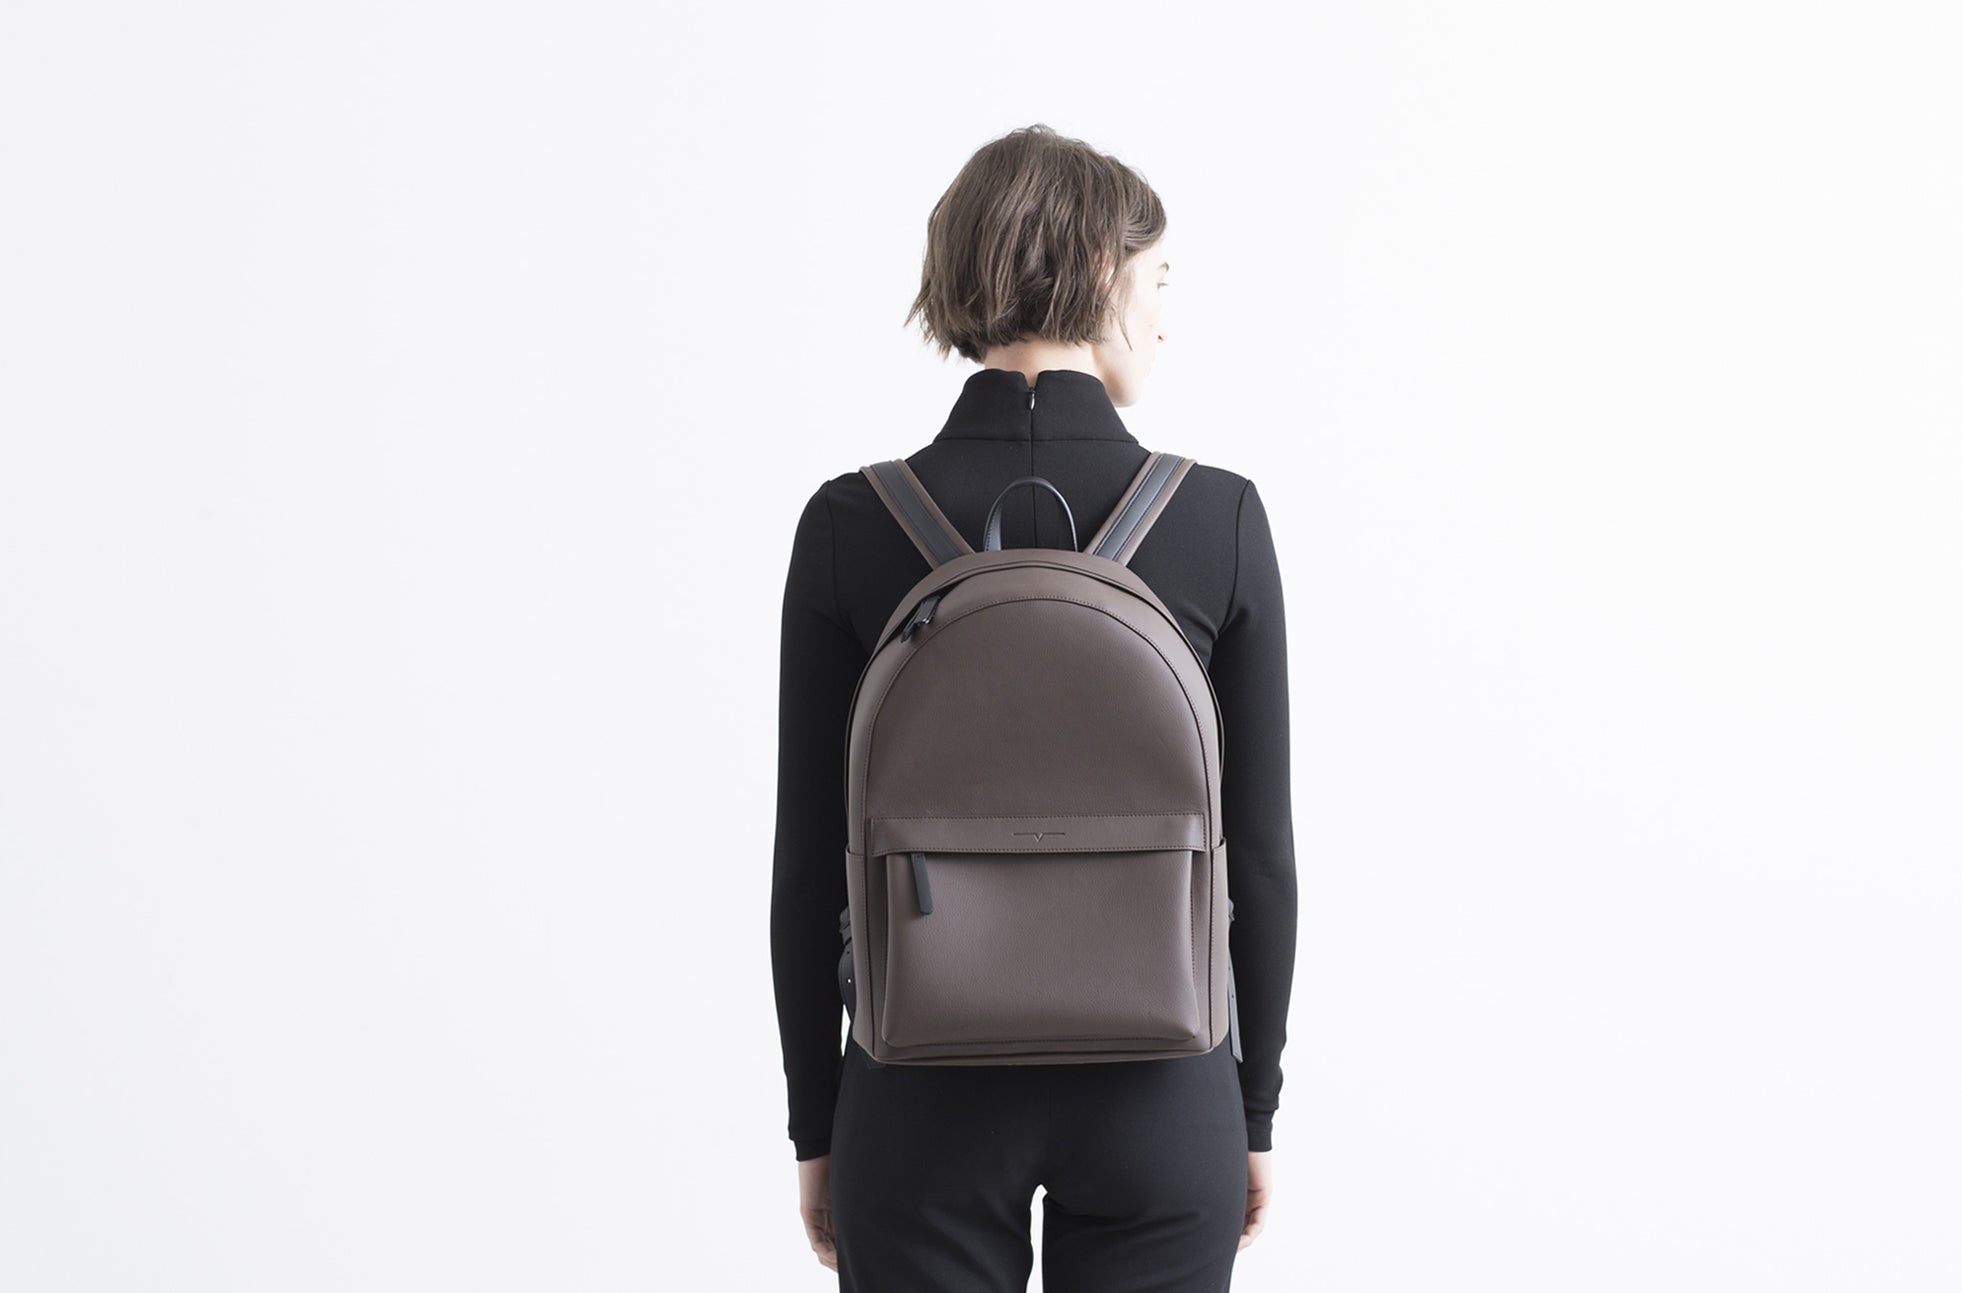 The Classic Backpack in Technik in Taupe and Black image 5